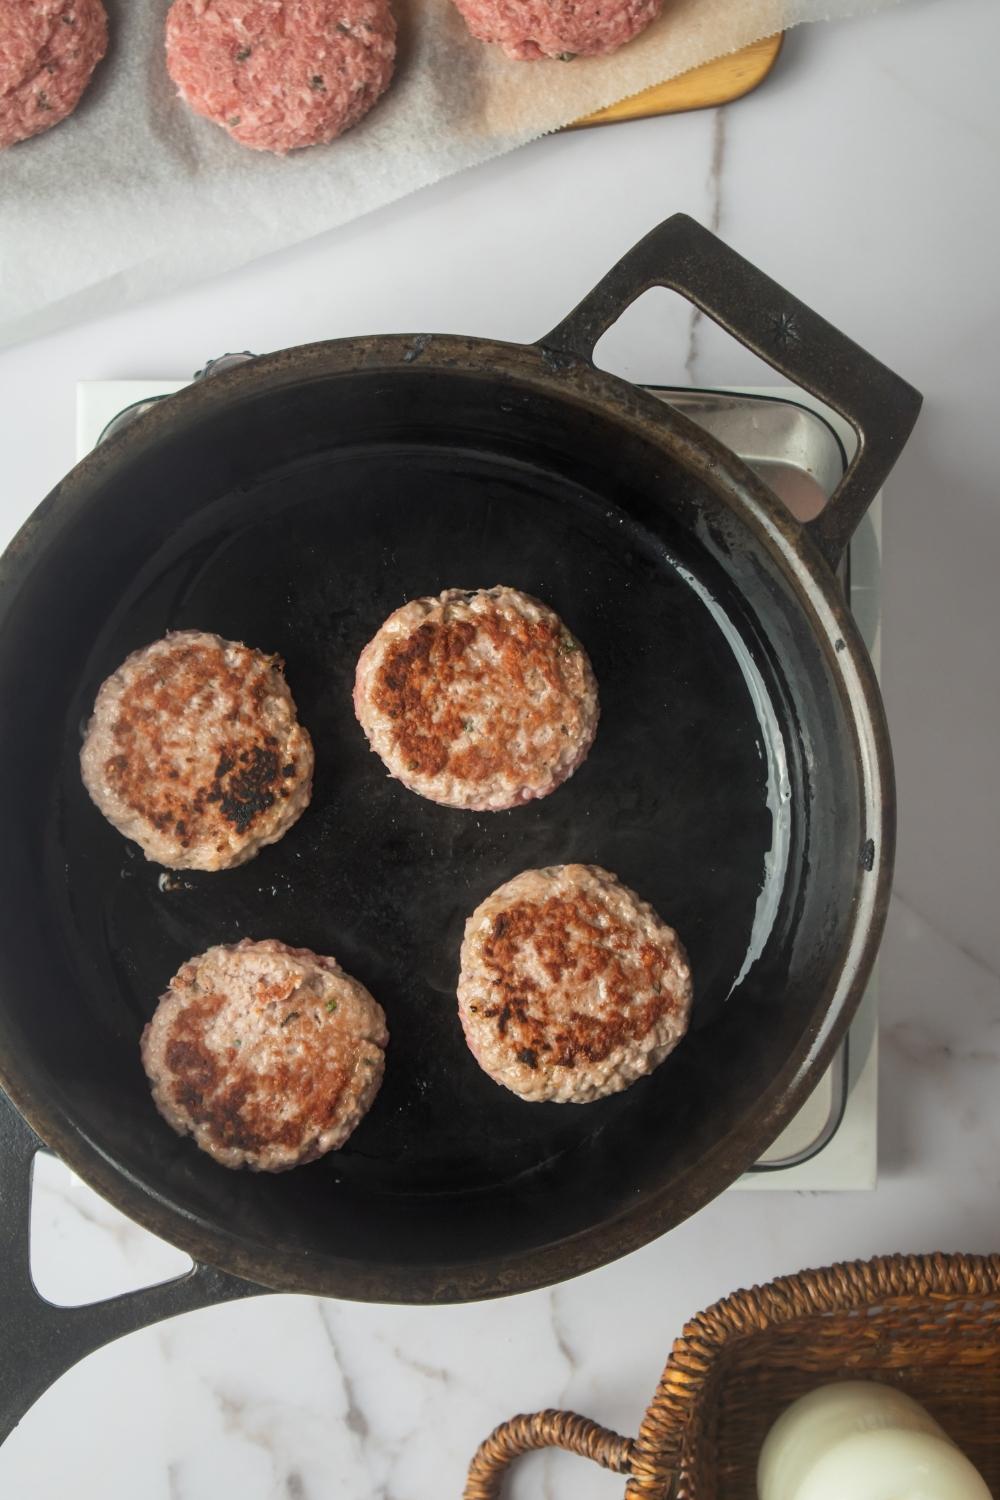 An overhead view of a skillet with four Jimmy Dean patties cooking on it.